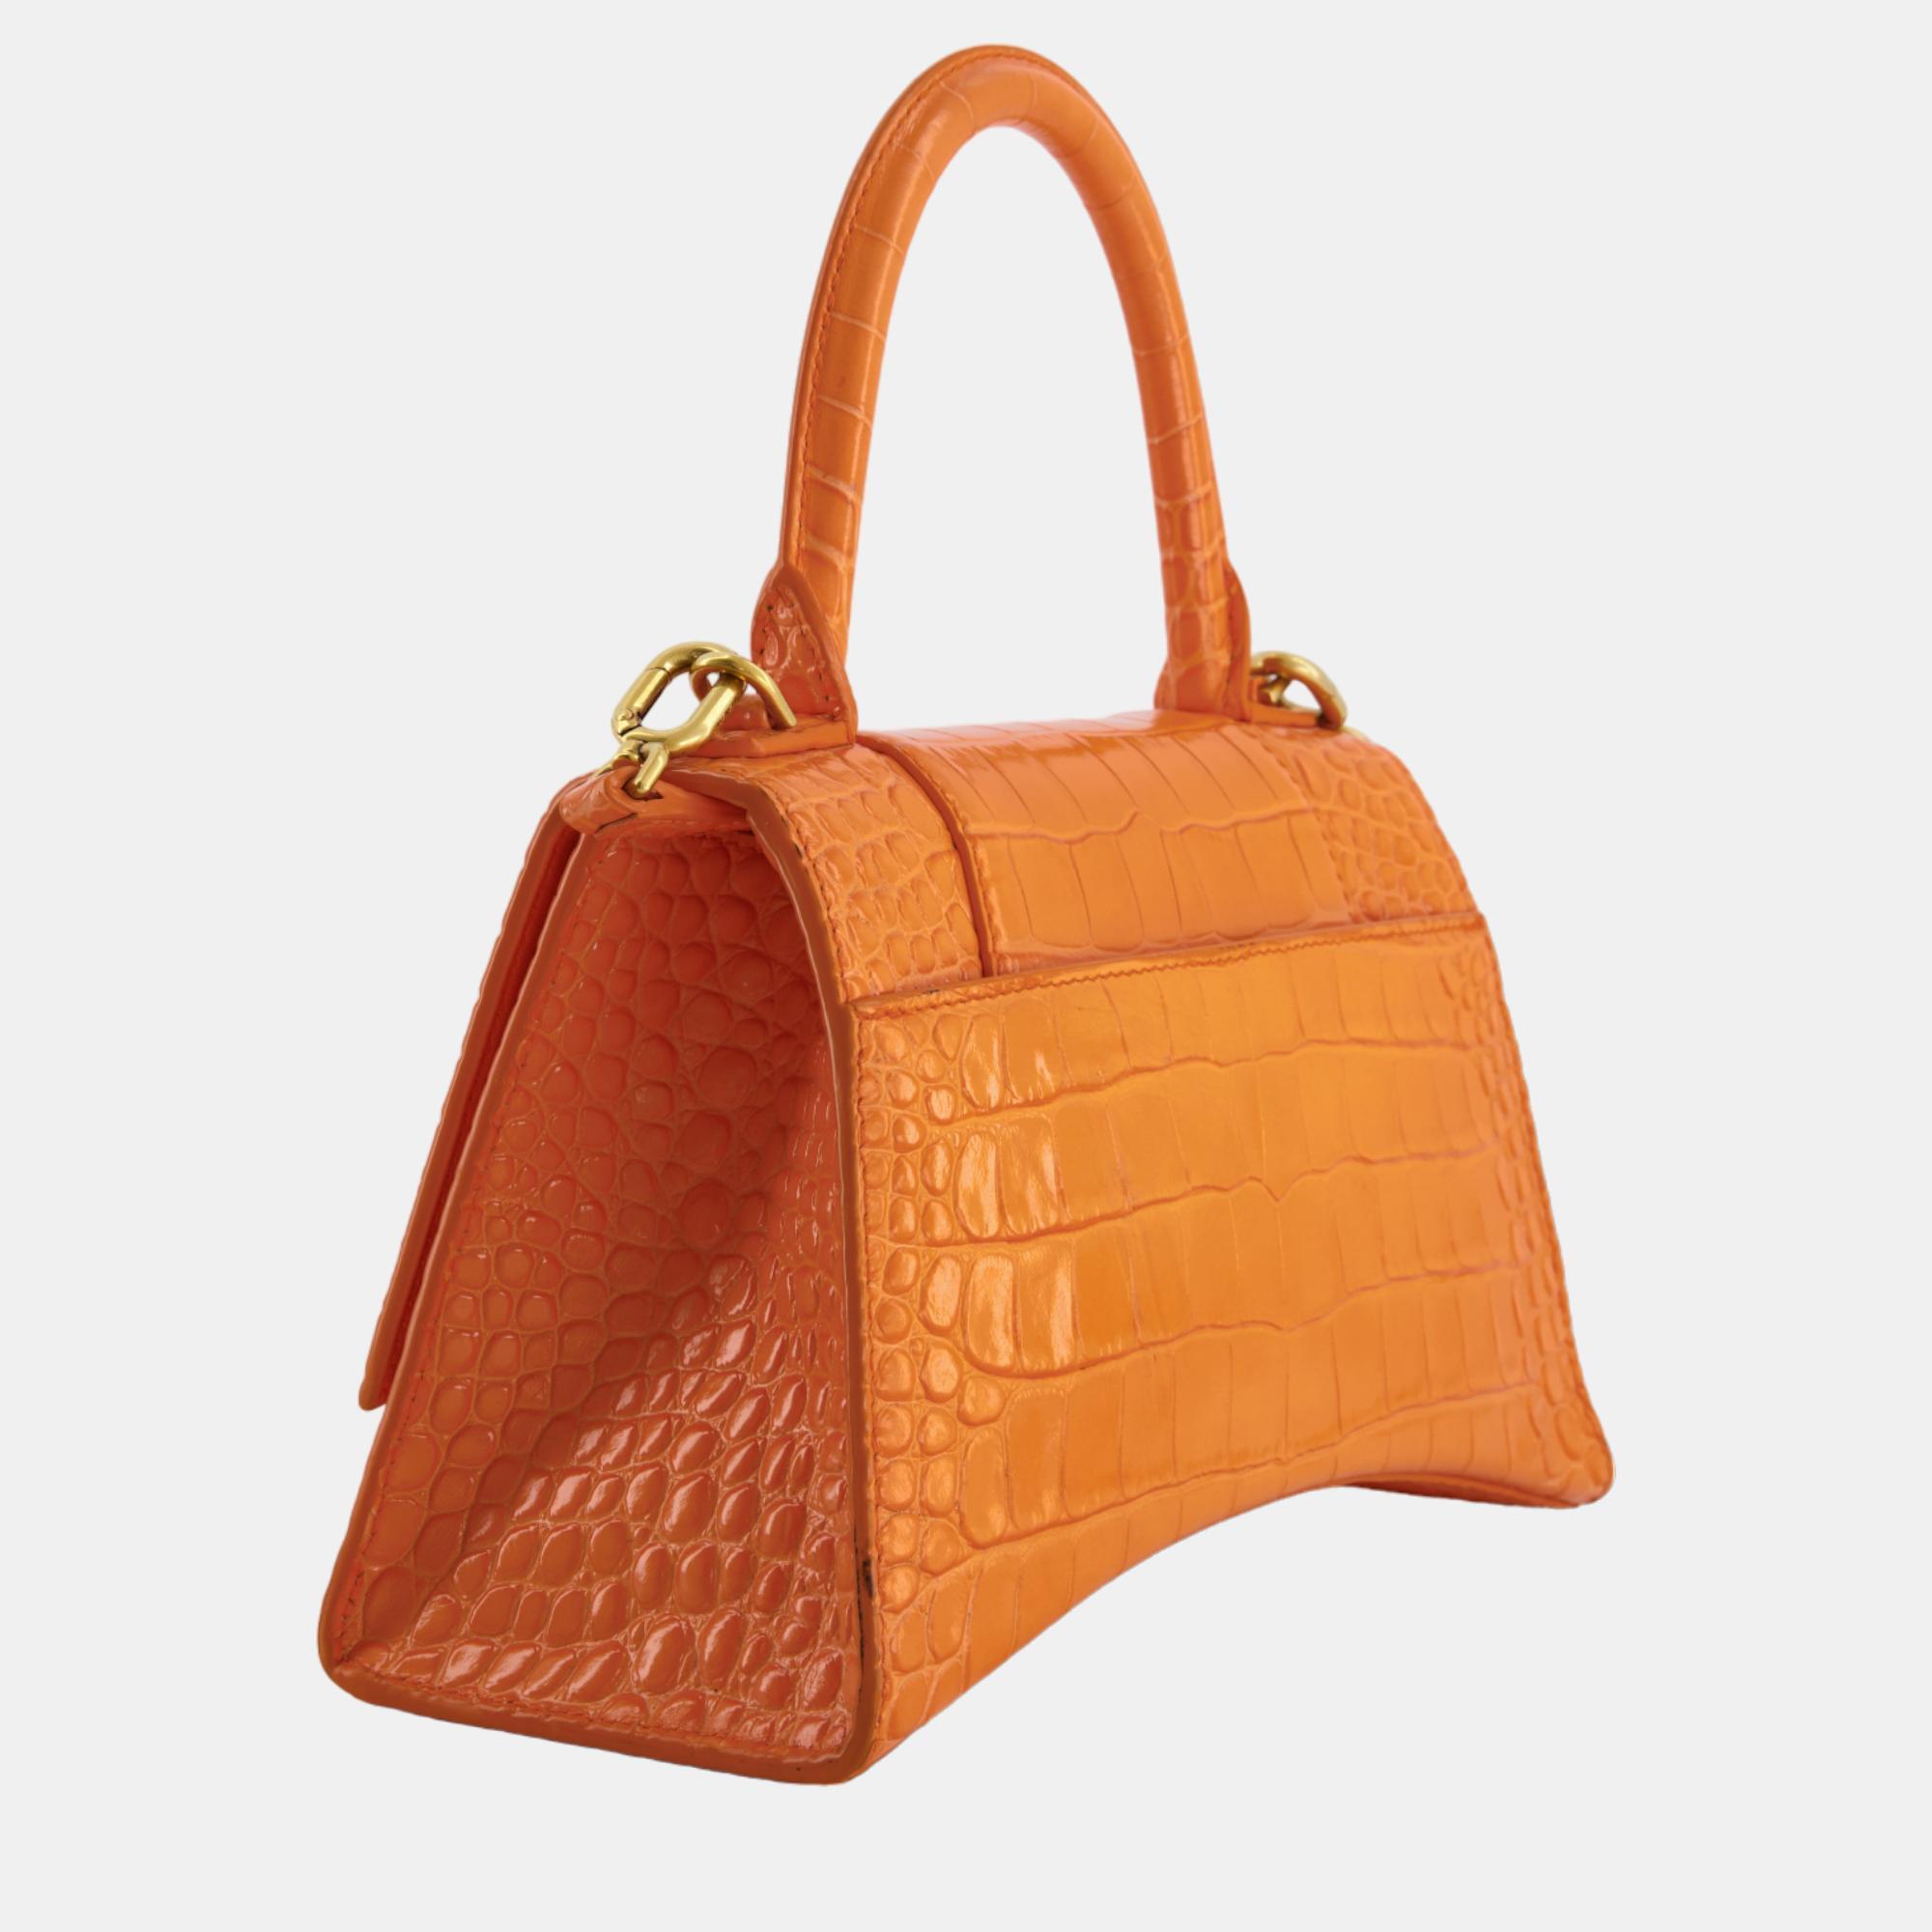 Balenciaga Orange Small Hourglass Bag In Croc Embossed Calf Leather With Gold Hardware